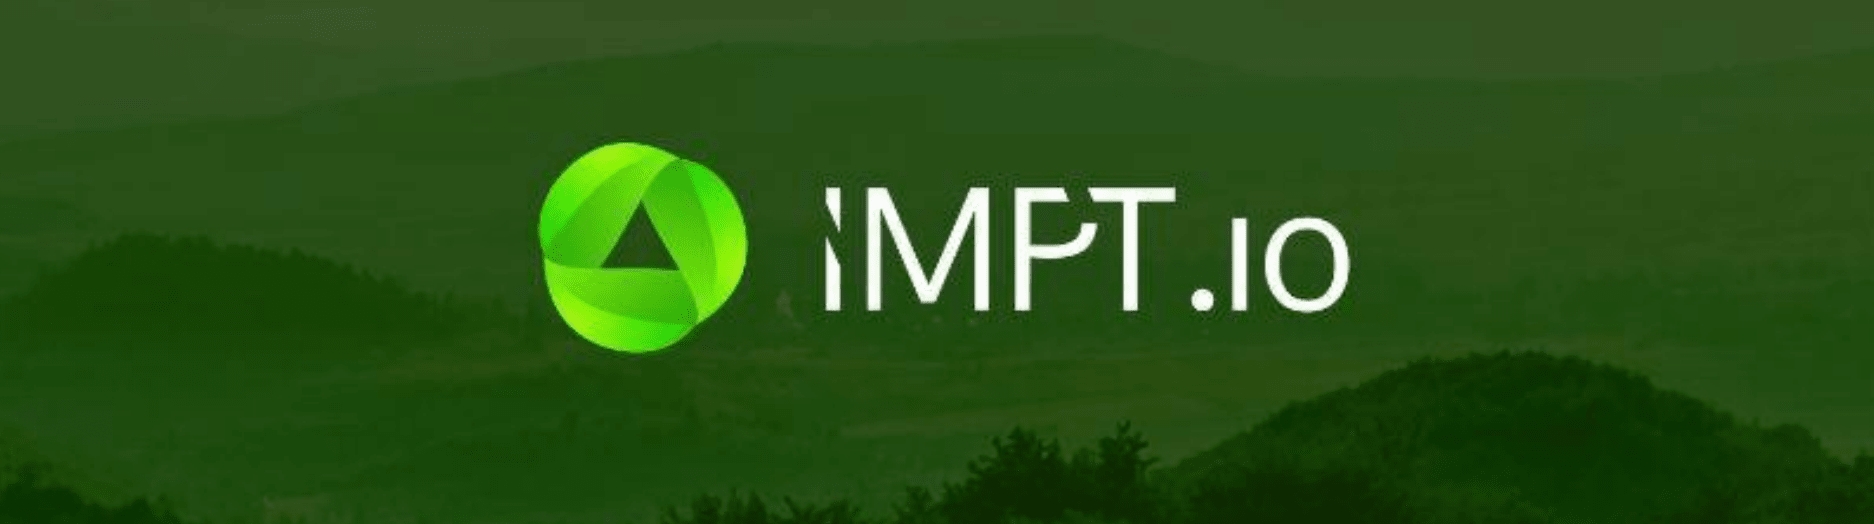 How to Buy IMPT Token – Step-by-Step Guide for Beginners